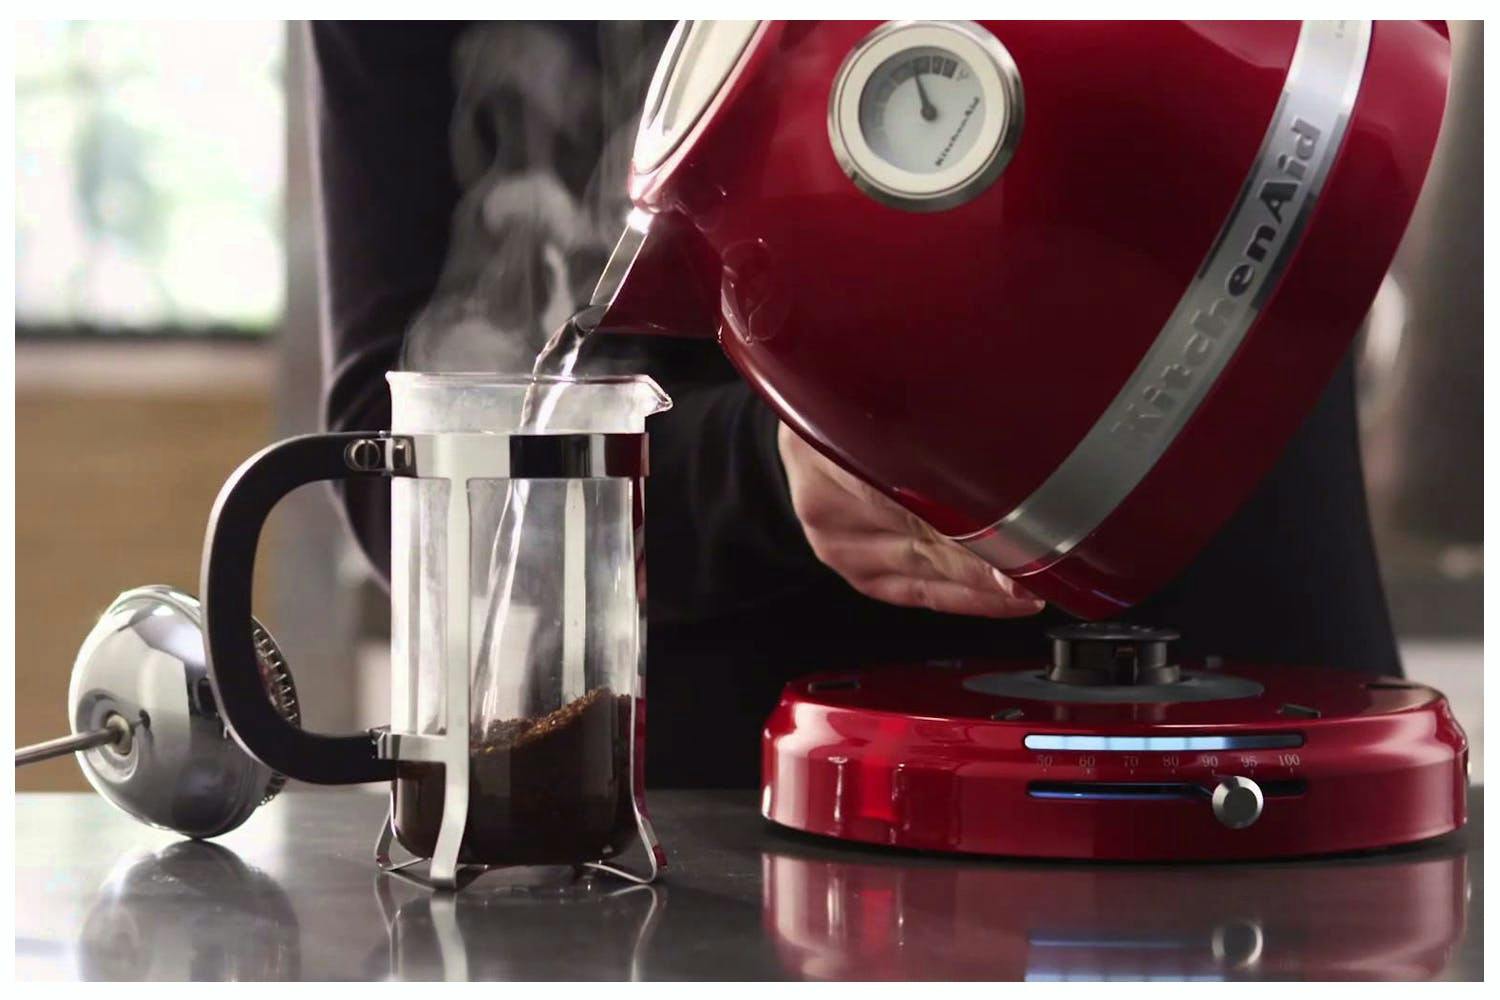 Electric kettle, Artisan 1.5L, Empire Red color - KitchenAid brand